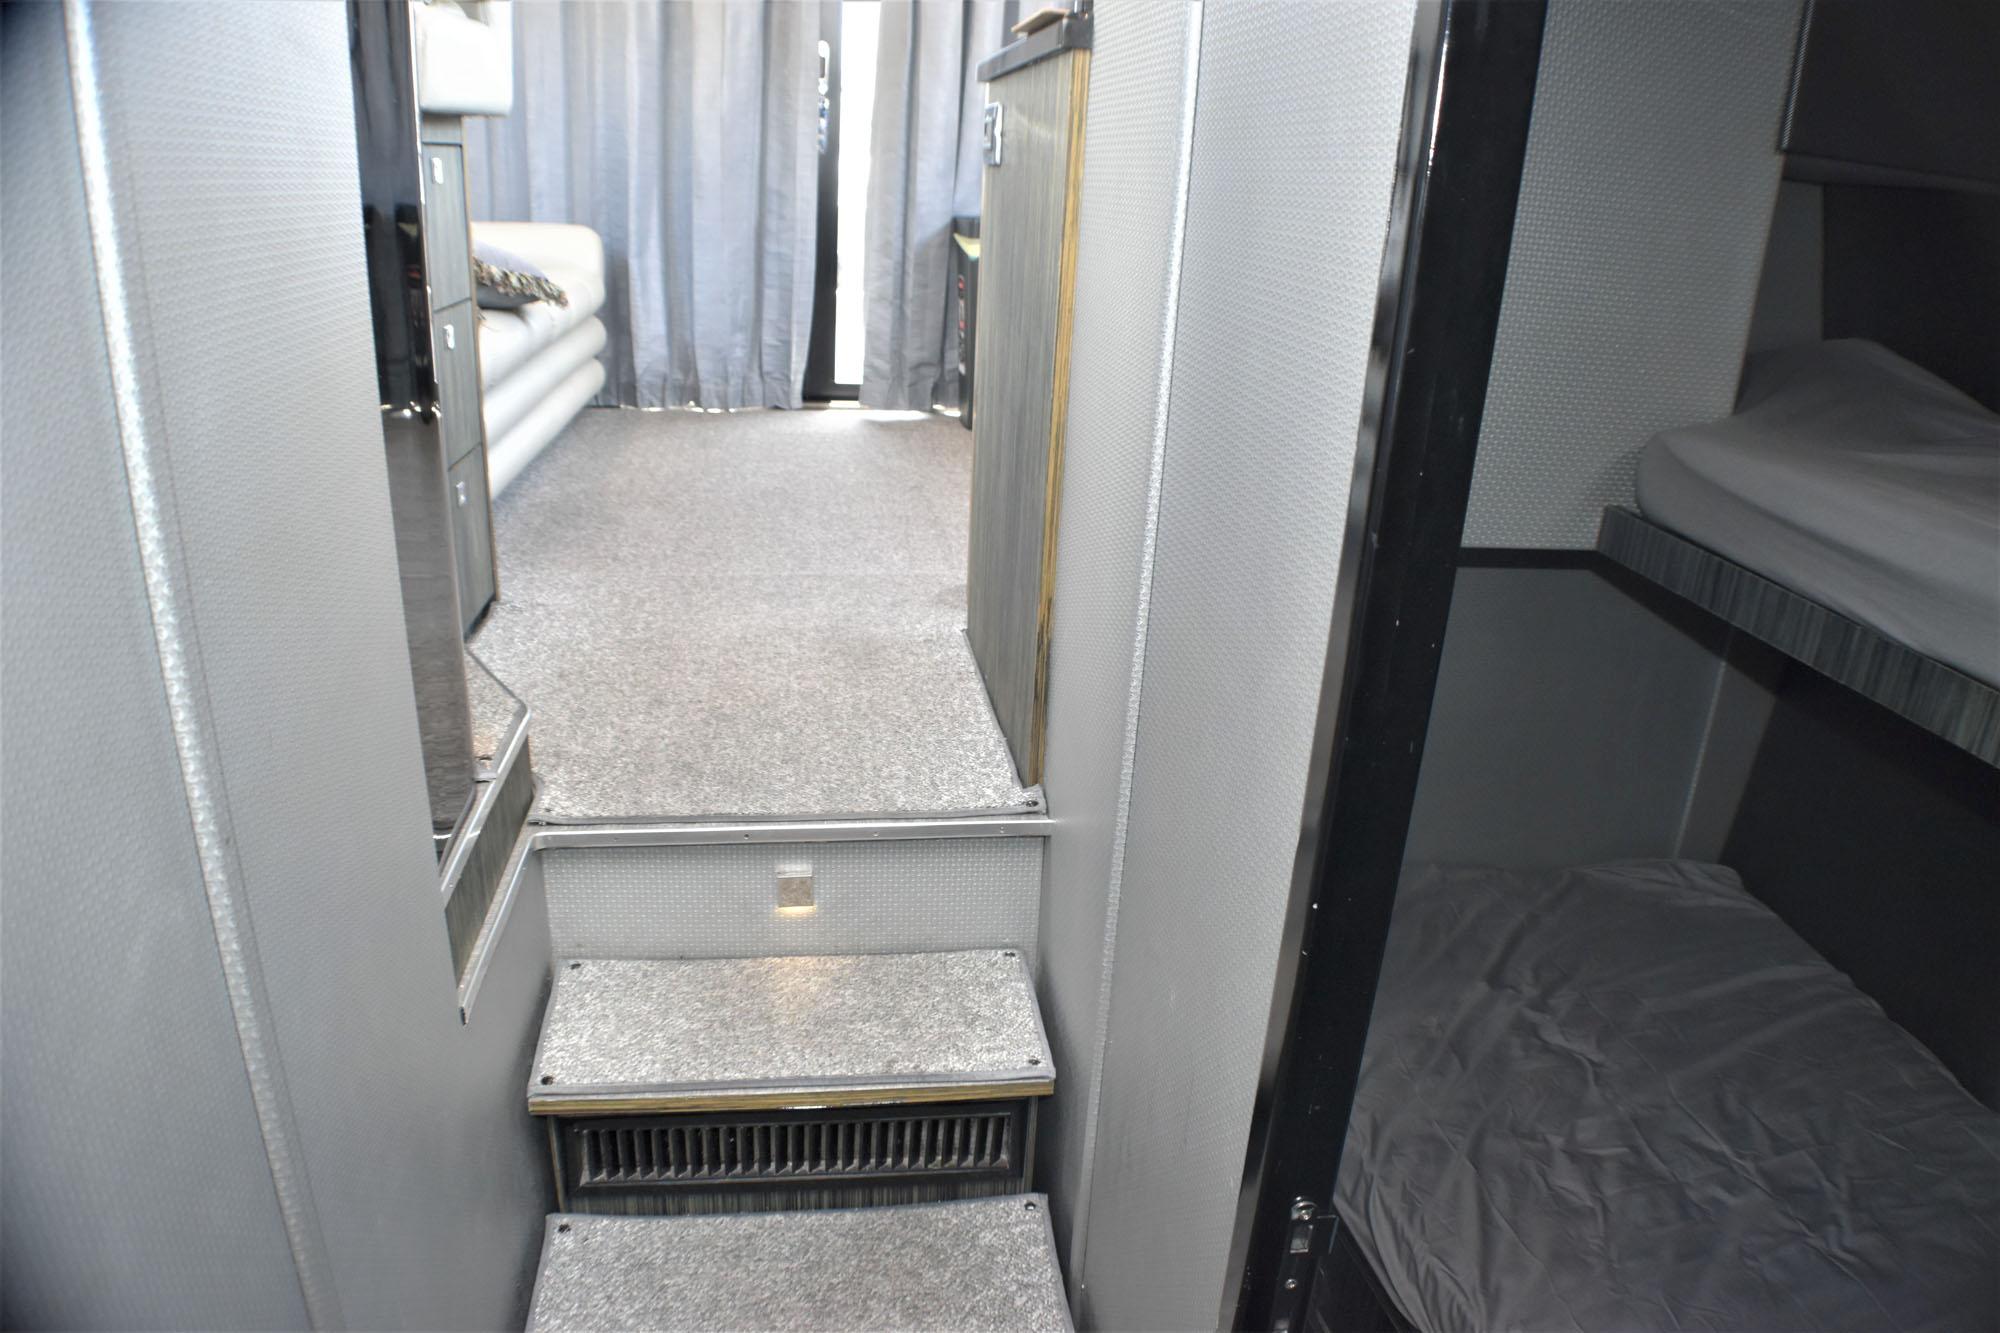 Access Way to Staterooms